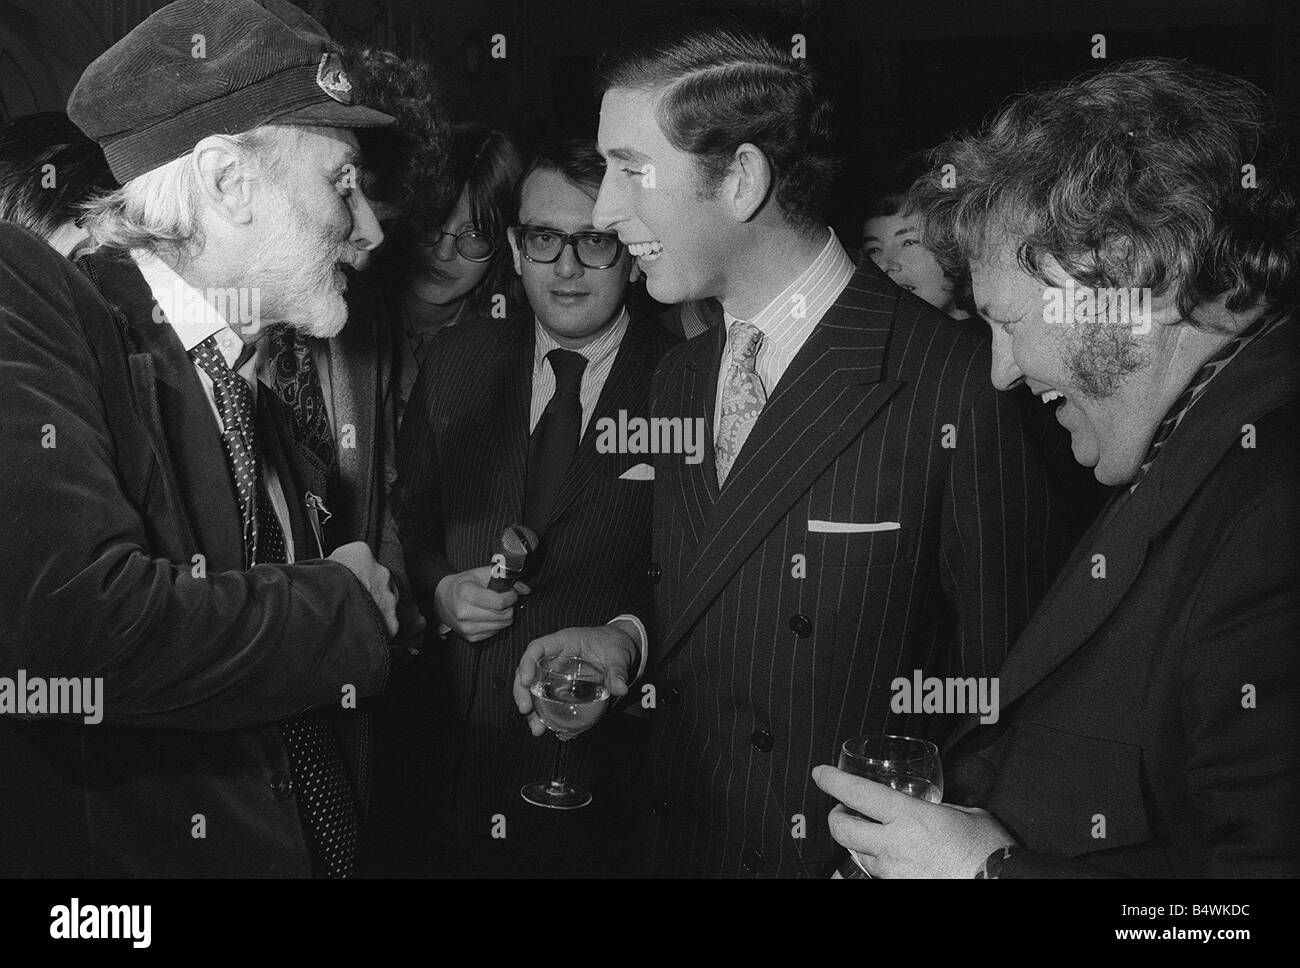 Prince Charles laughs merrily with two of his heroes Harry Secombe and Spike Milligan at the launching of their new Goons book at the Eccentric Club in London Reporters Paul Callan and Janet Street Porter listen in on the conversation November 1973 Y2K Fame dtgu2 dtgu2 Stock Photo